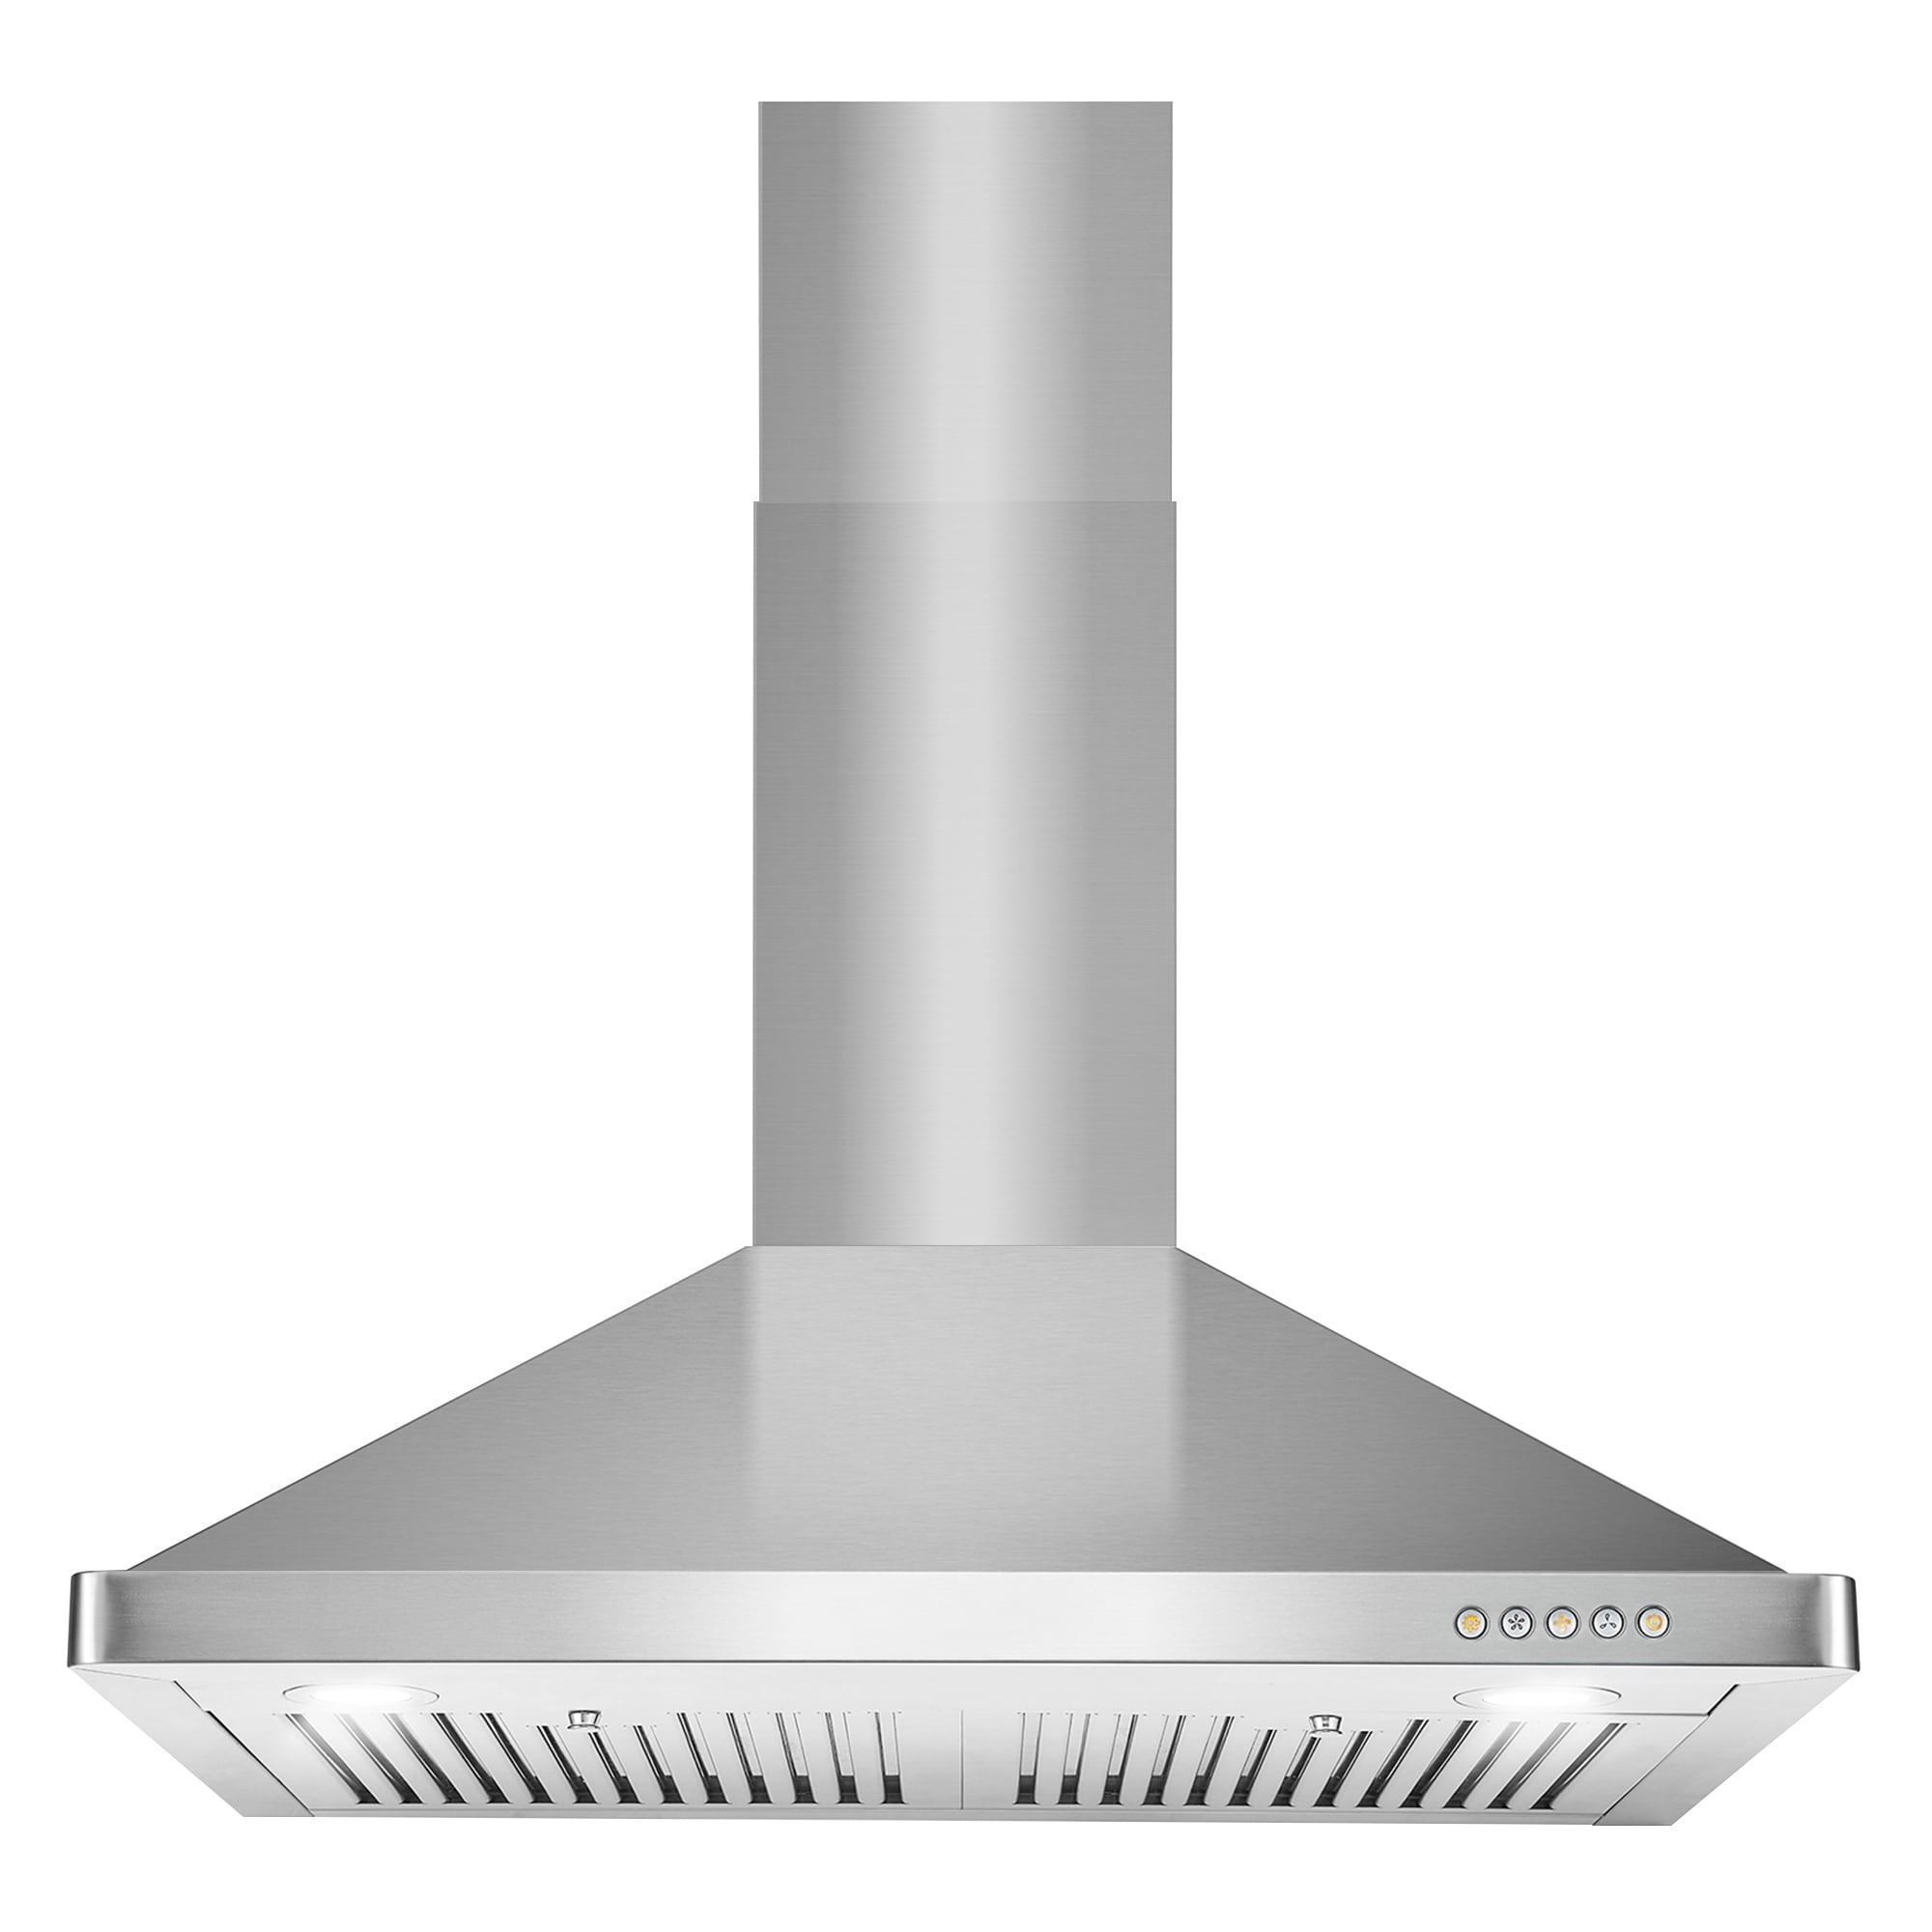 Cosmo Wall Mount Range Hood in Stainless Steel with Glass Hood, Permanent  Filters - On Sale - Bed Bath & Beyond - 10306106